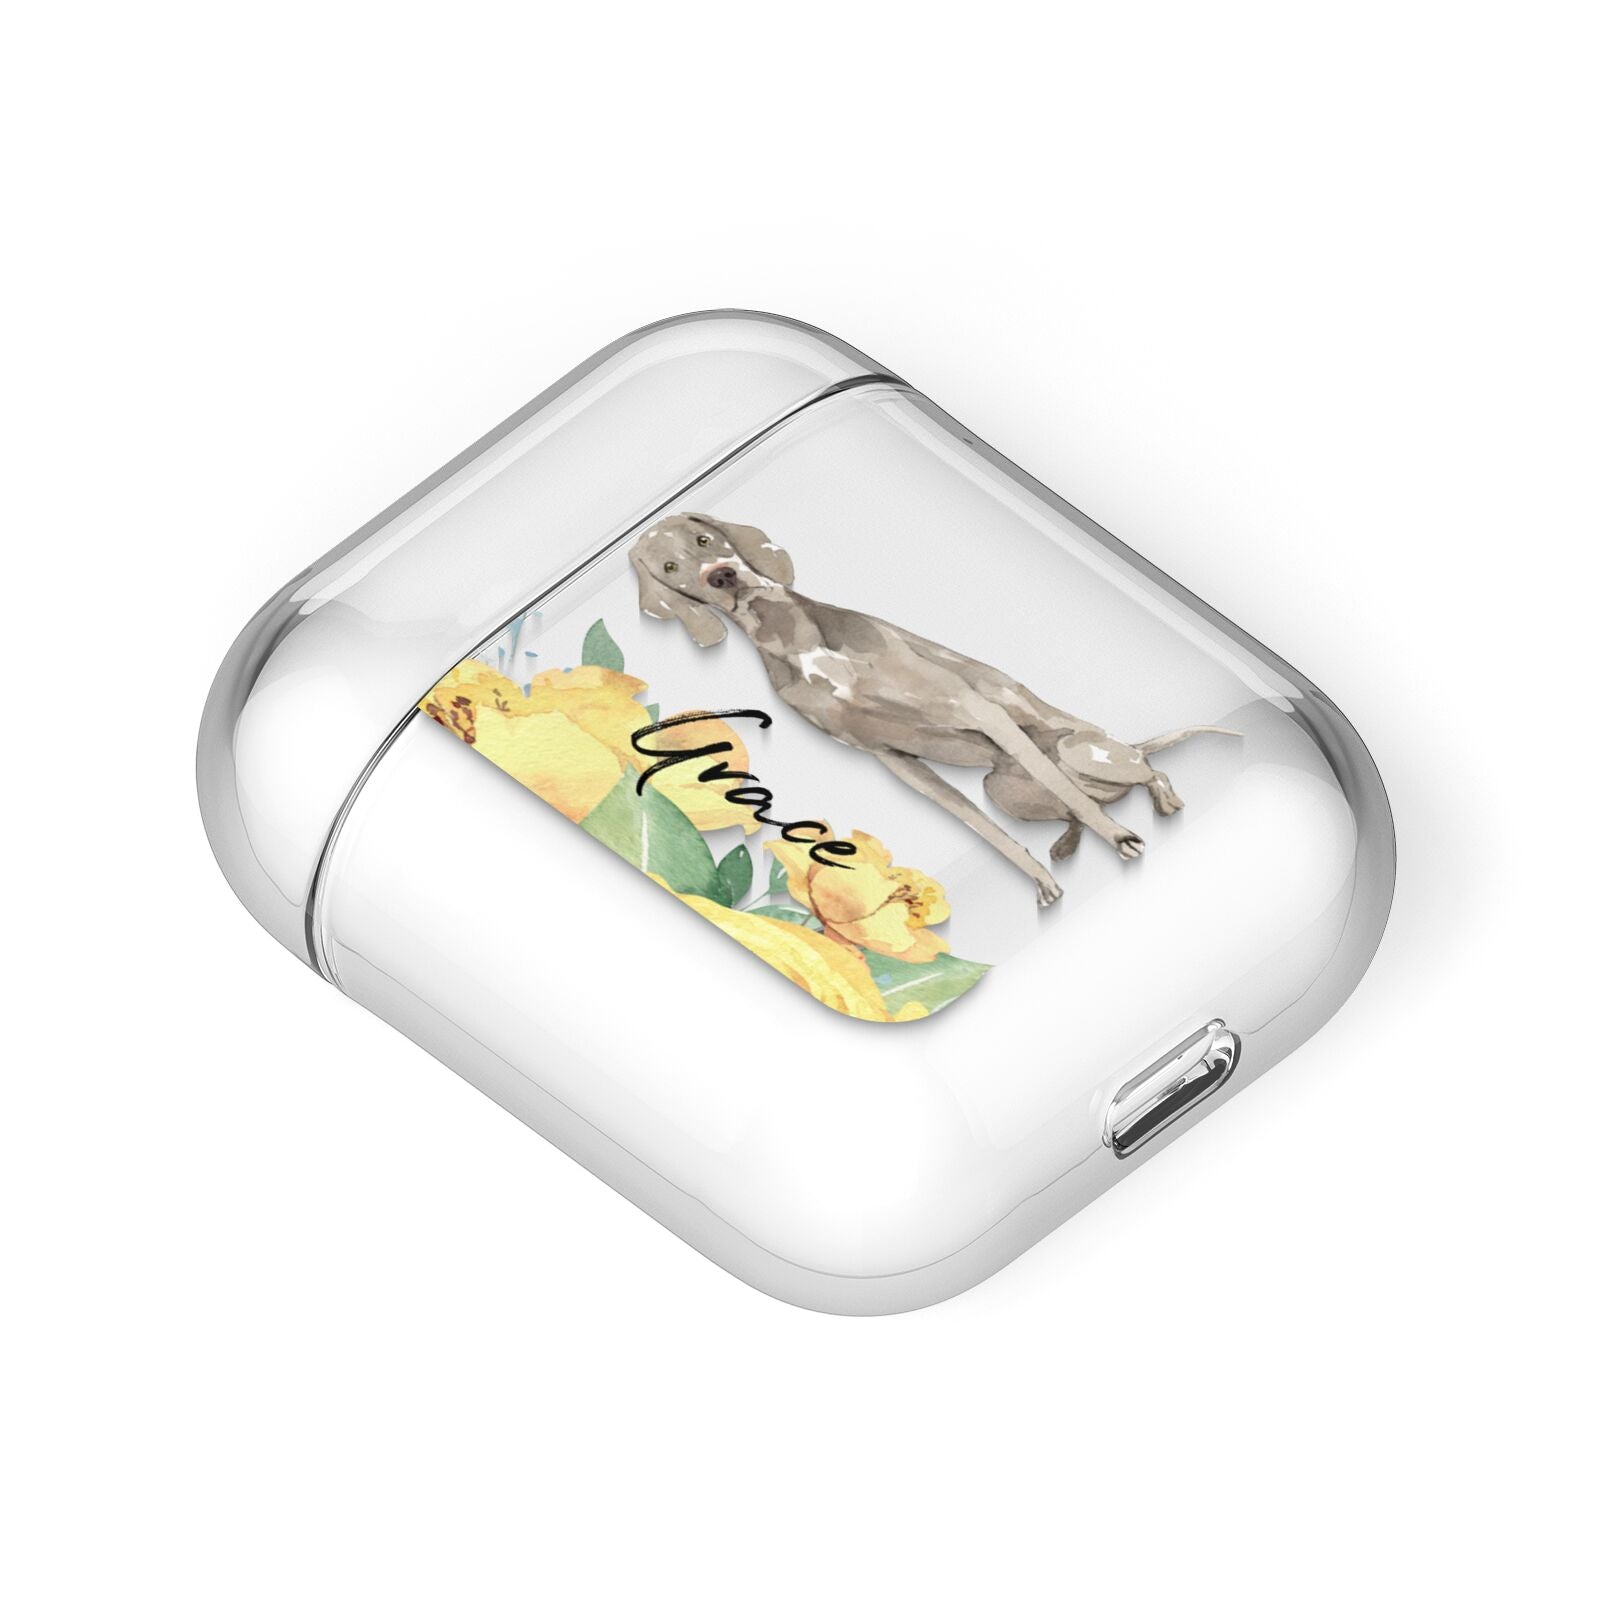 Personalised Weimaraner AirPods Case Laid Flat